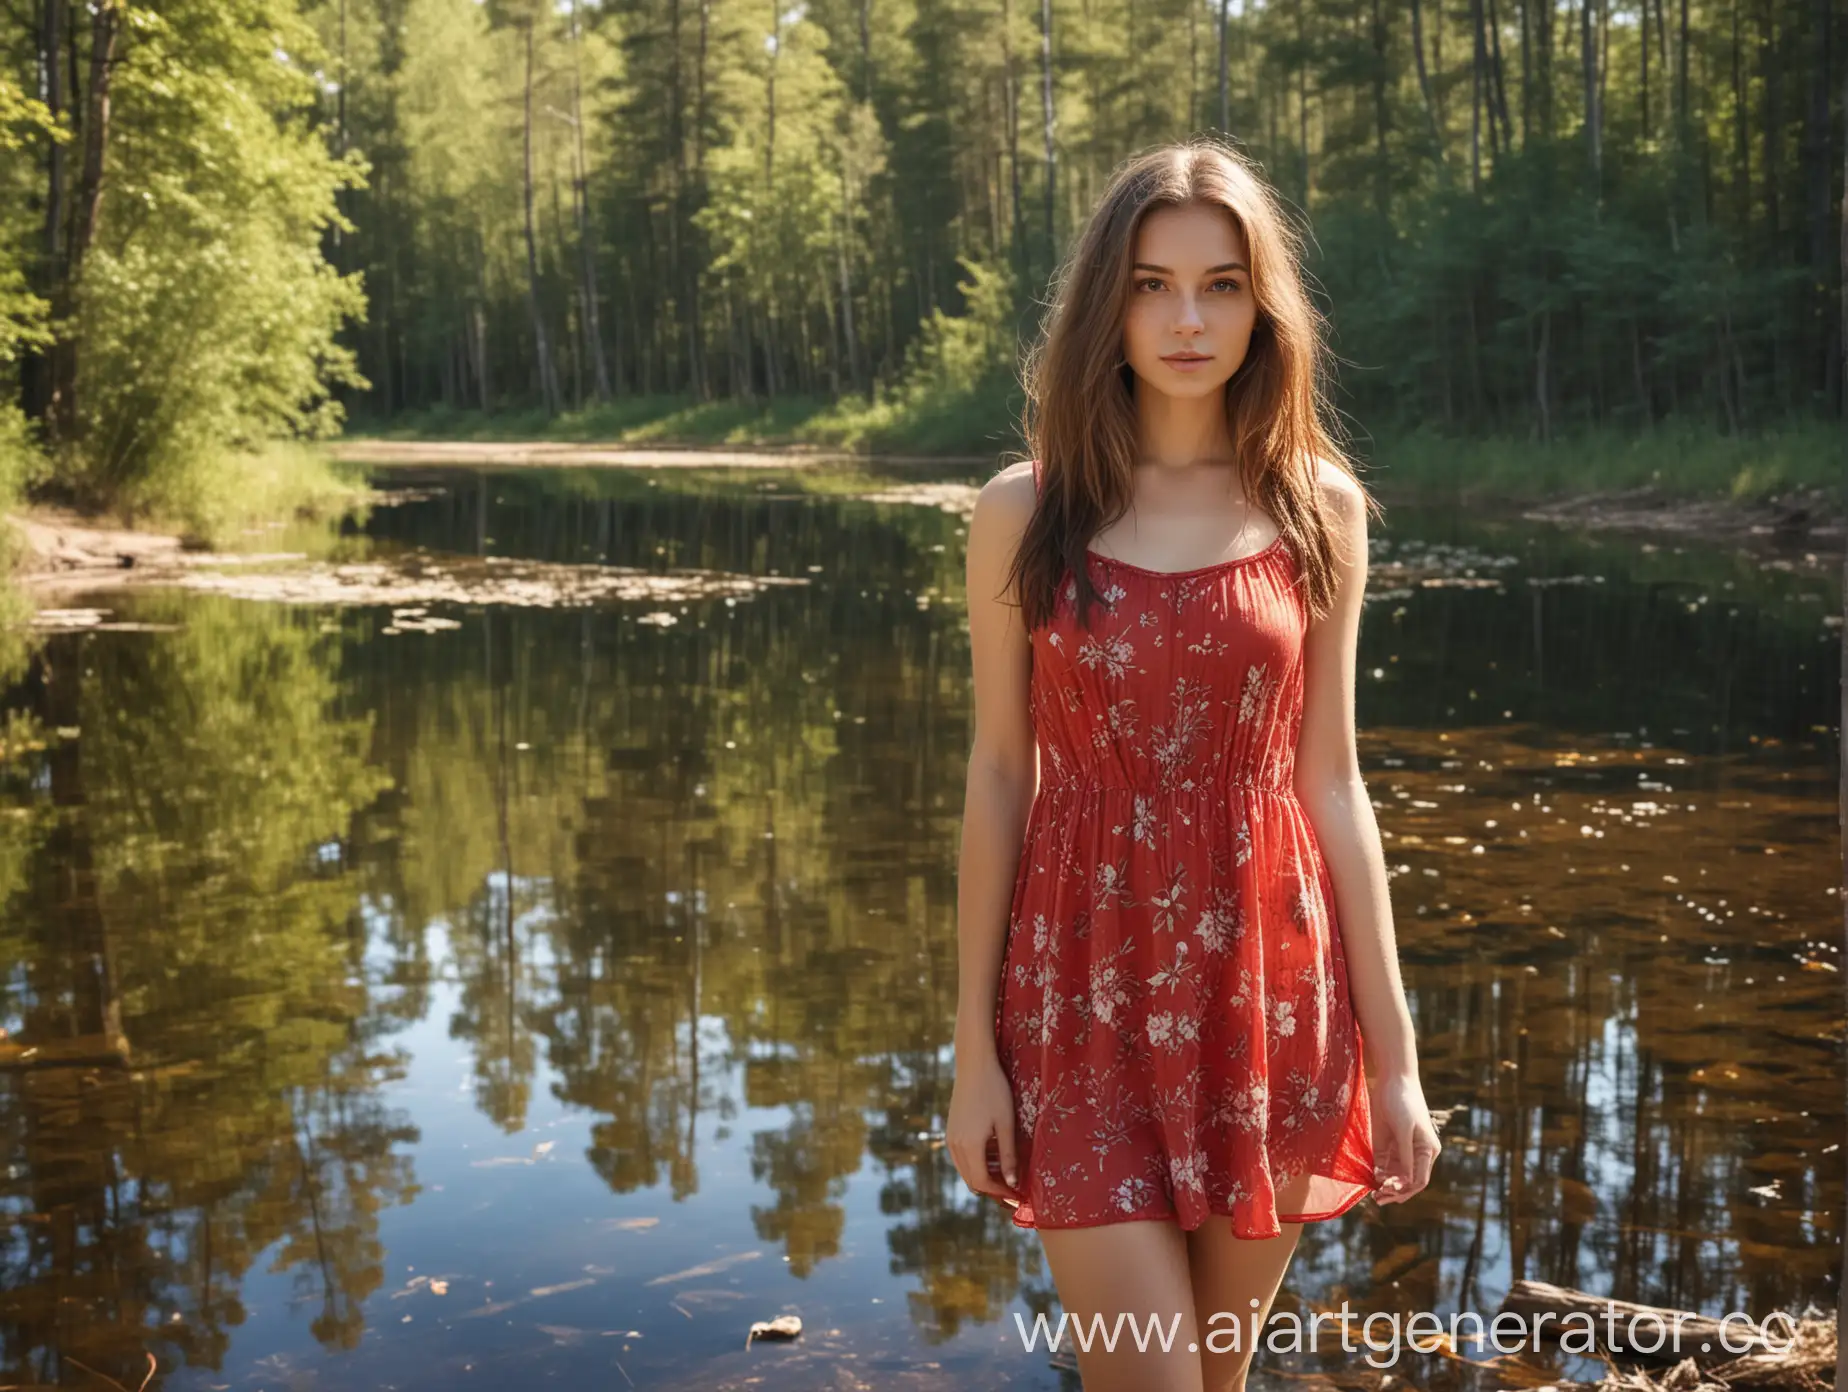 Russian-Beauty-in-SemiTransparent-Sundress-by-Forest-Lake